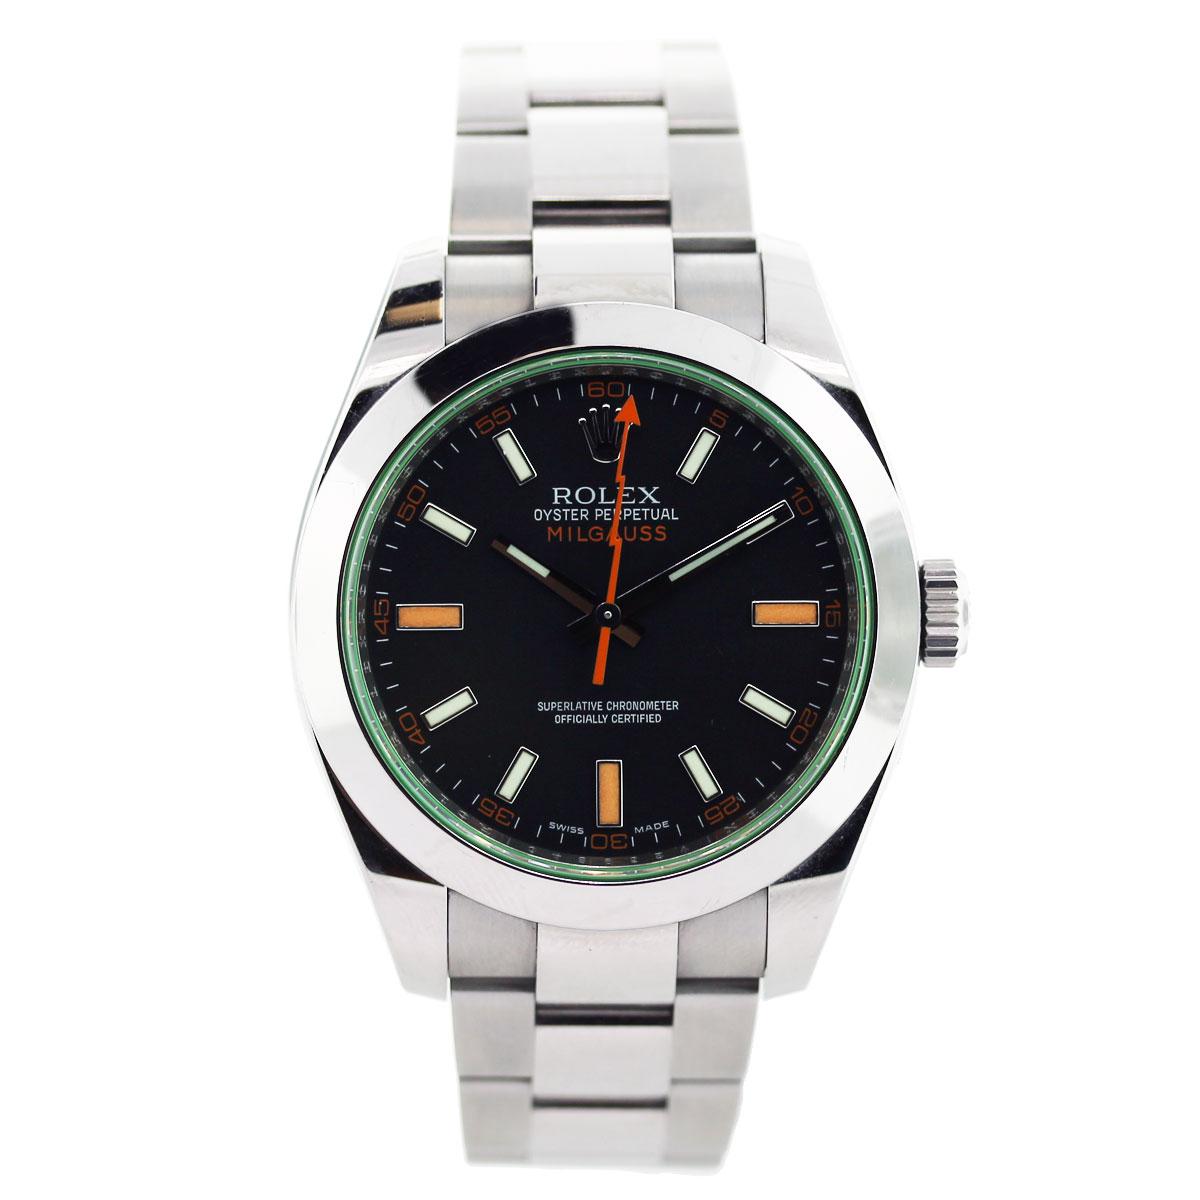 Rolex Milgauss 116400 GV Green Crystal 50th Anniversary Edition, used rolex, pre owned milgauss